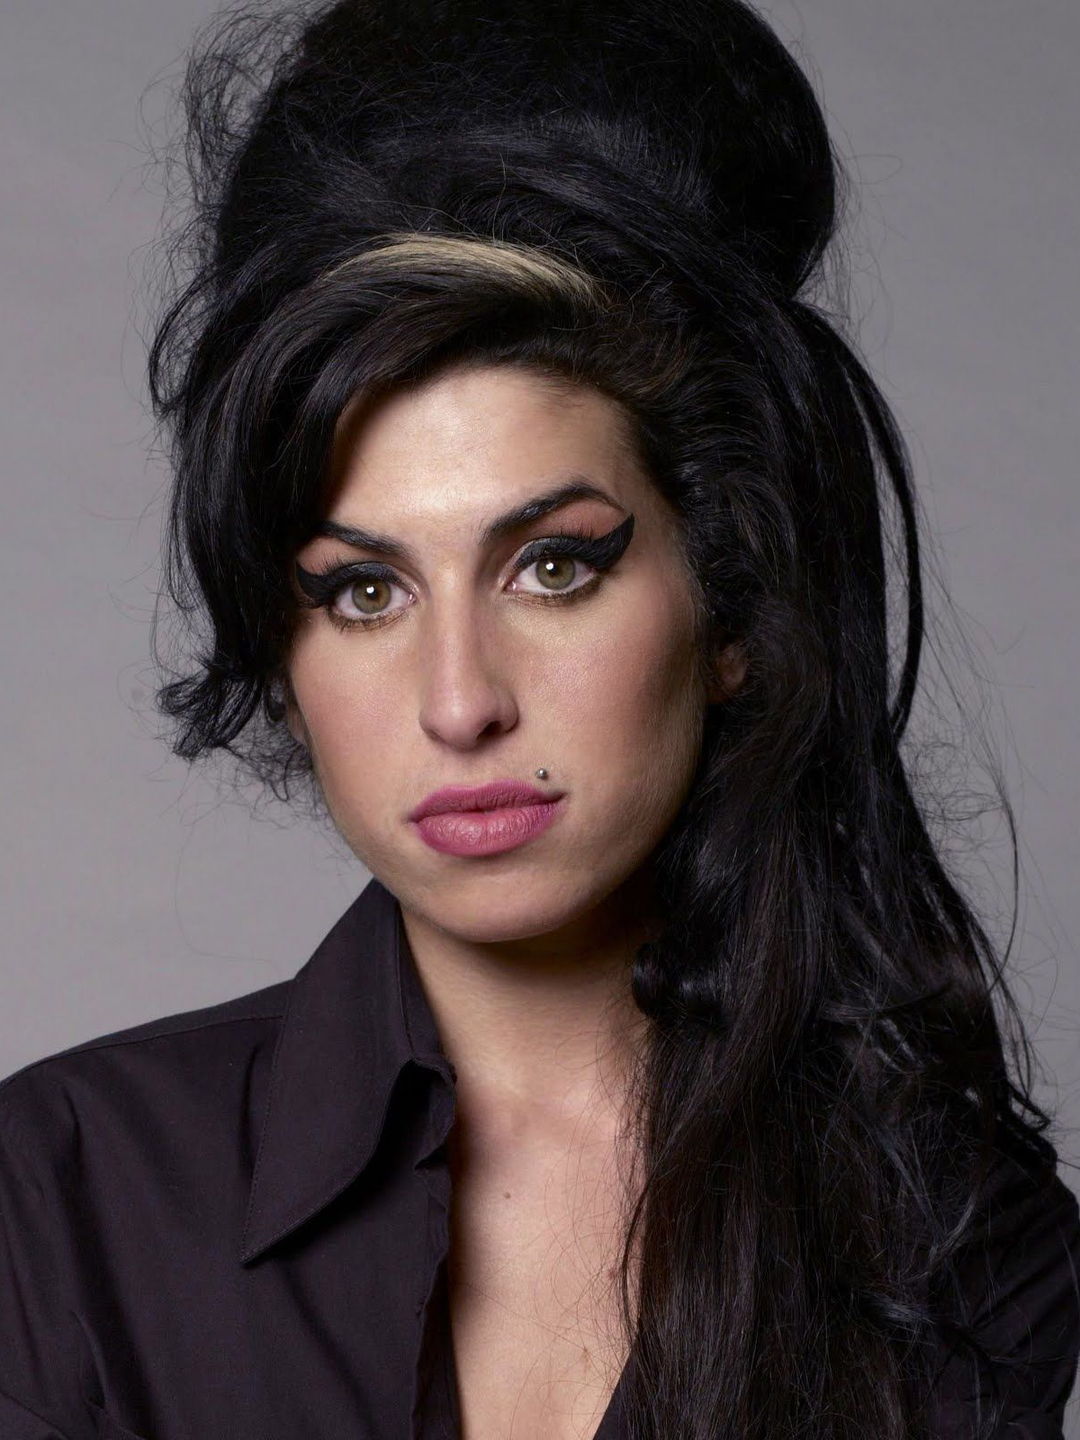 Amy Winehouse early childhood